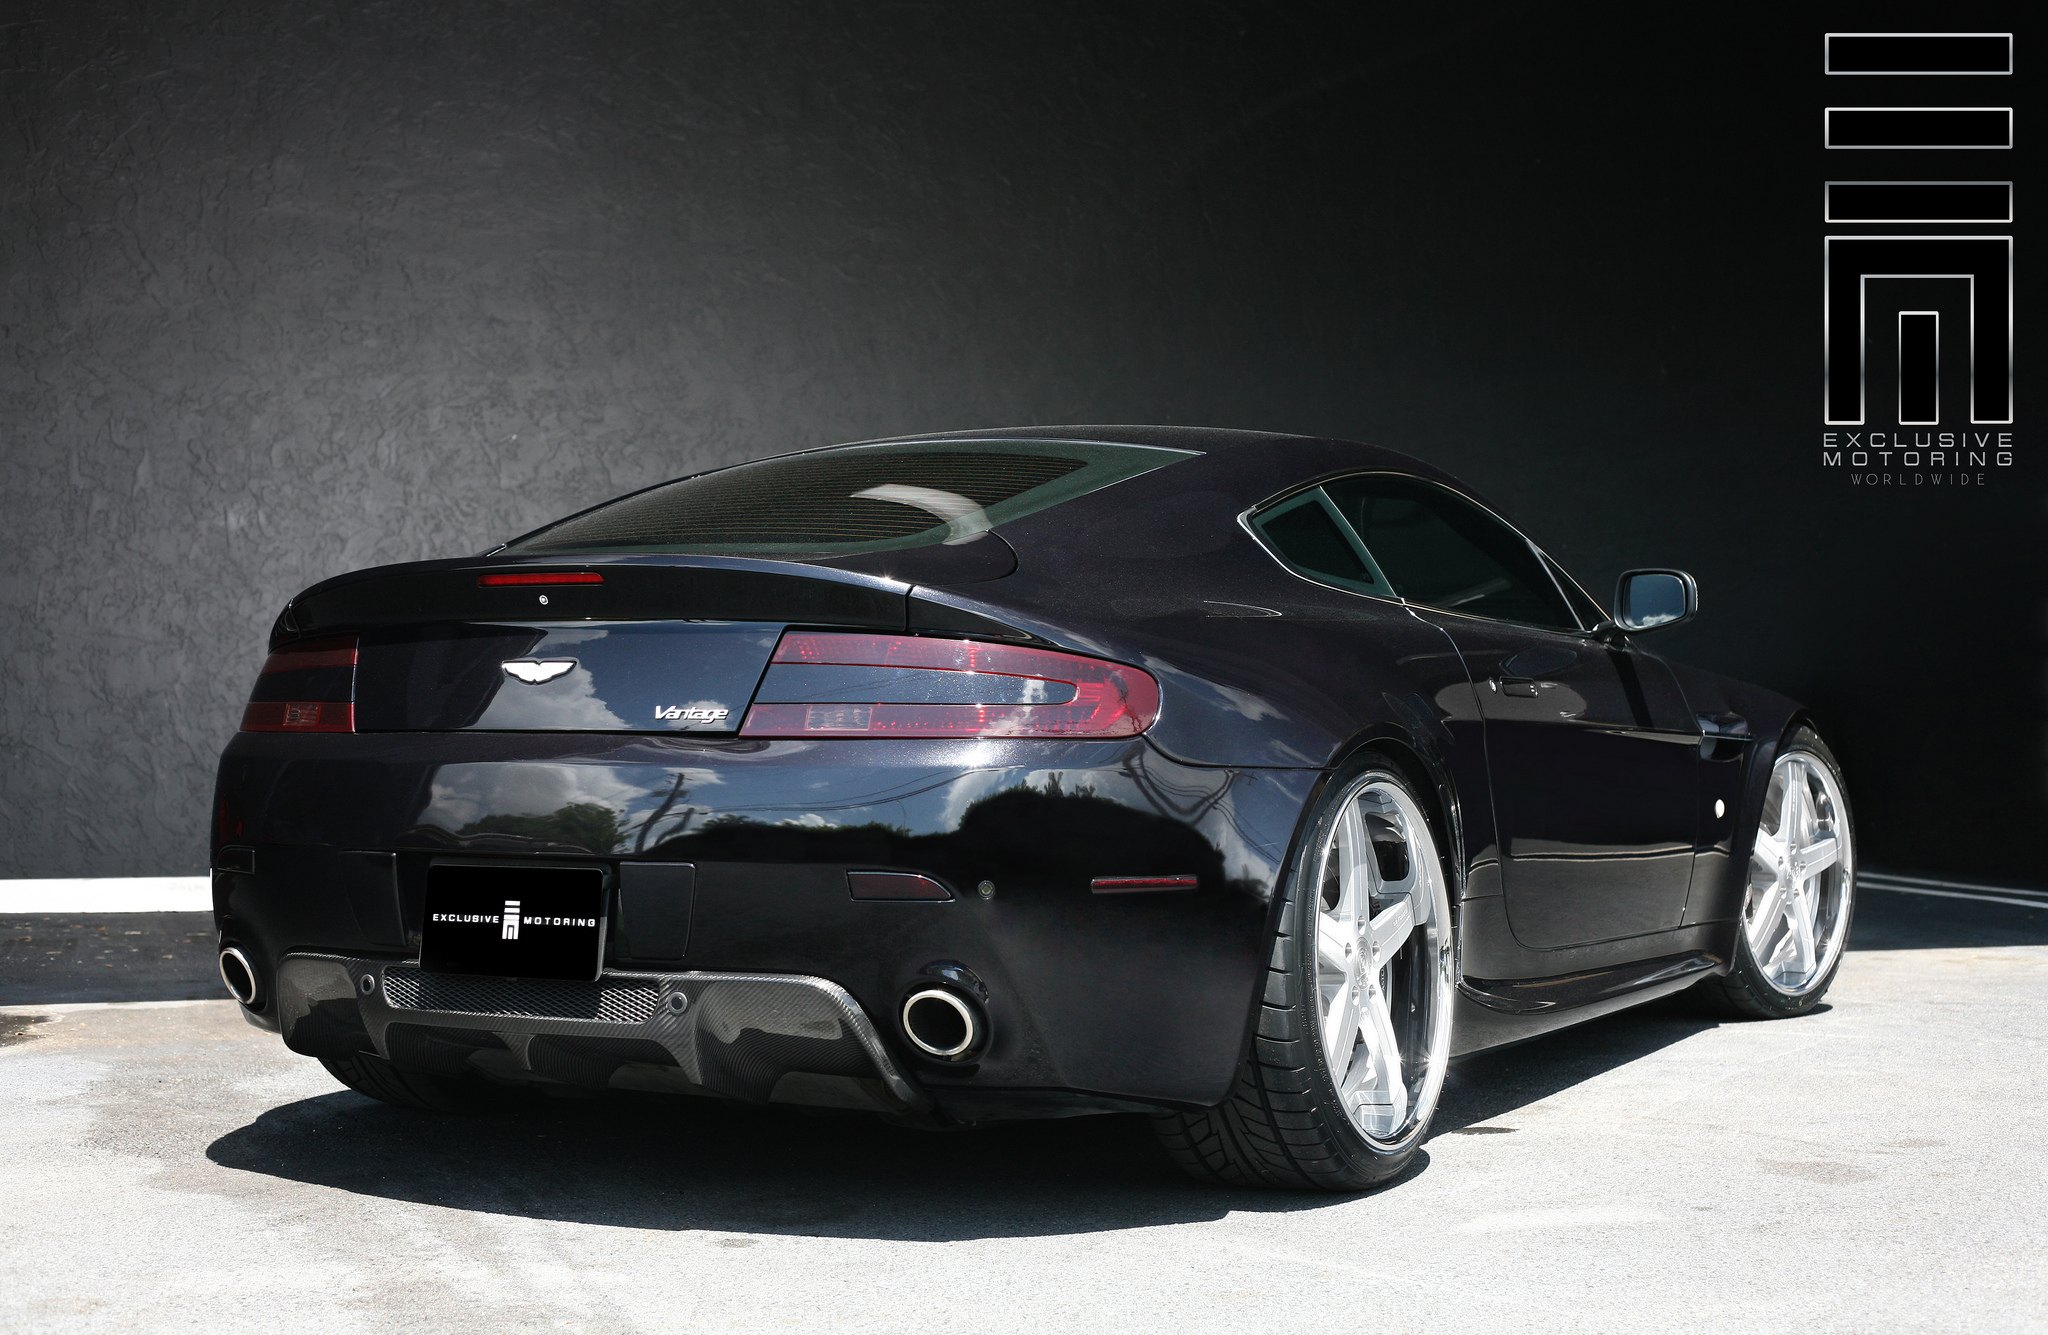 Custom Aston Martin Vantage with carbon fiber elements, silver wheels - Photo by Exclusive Motoring